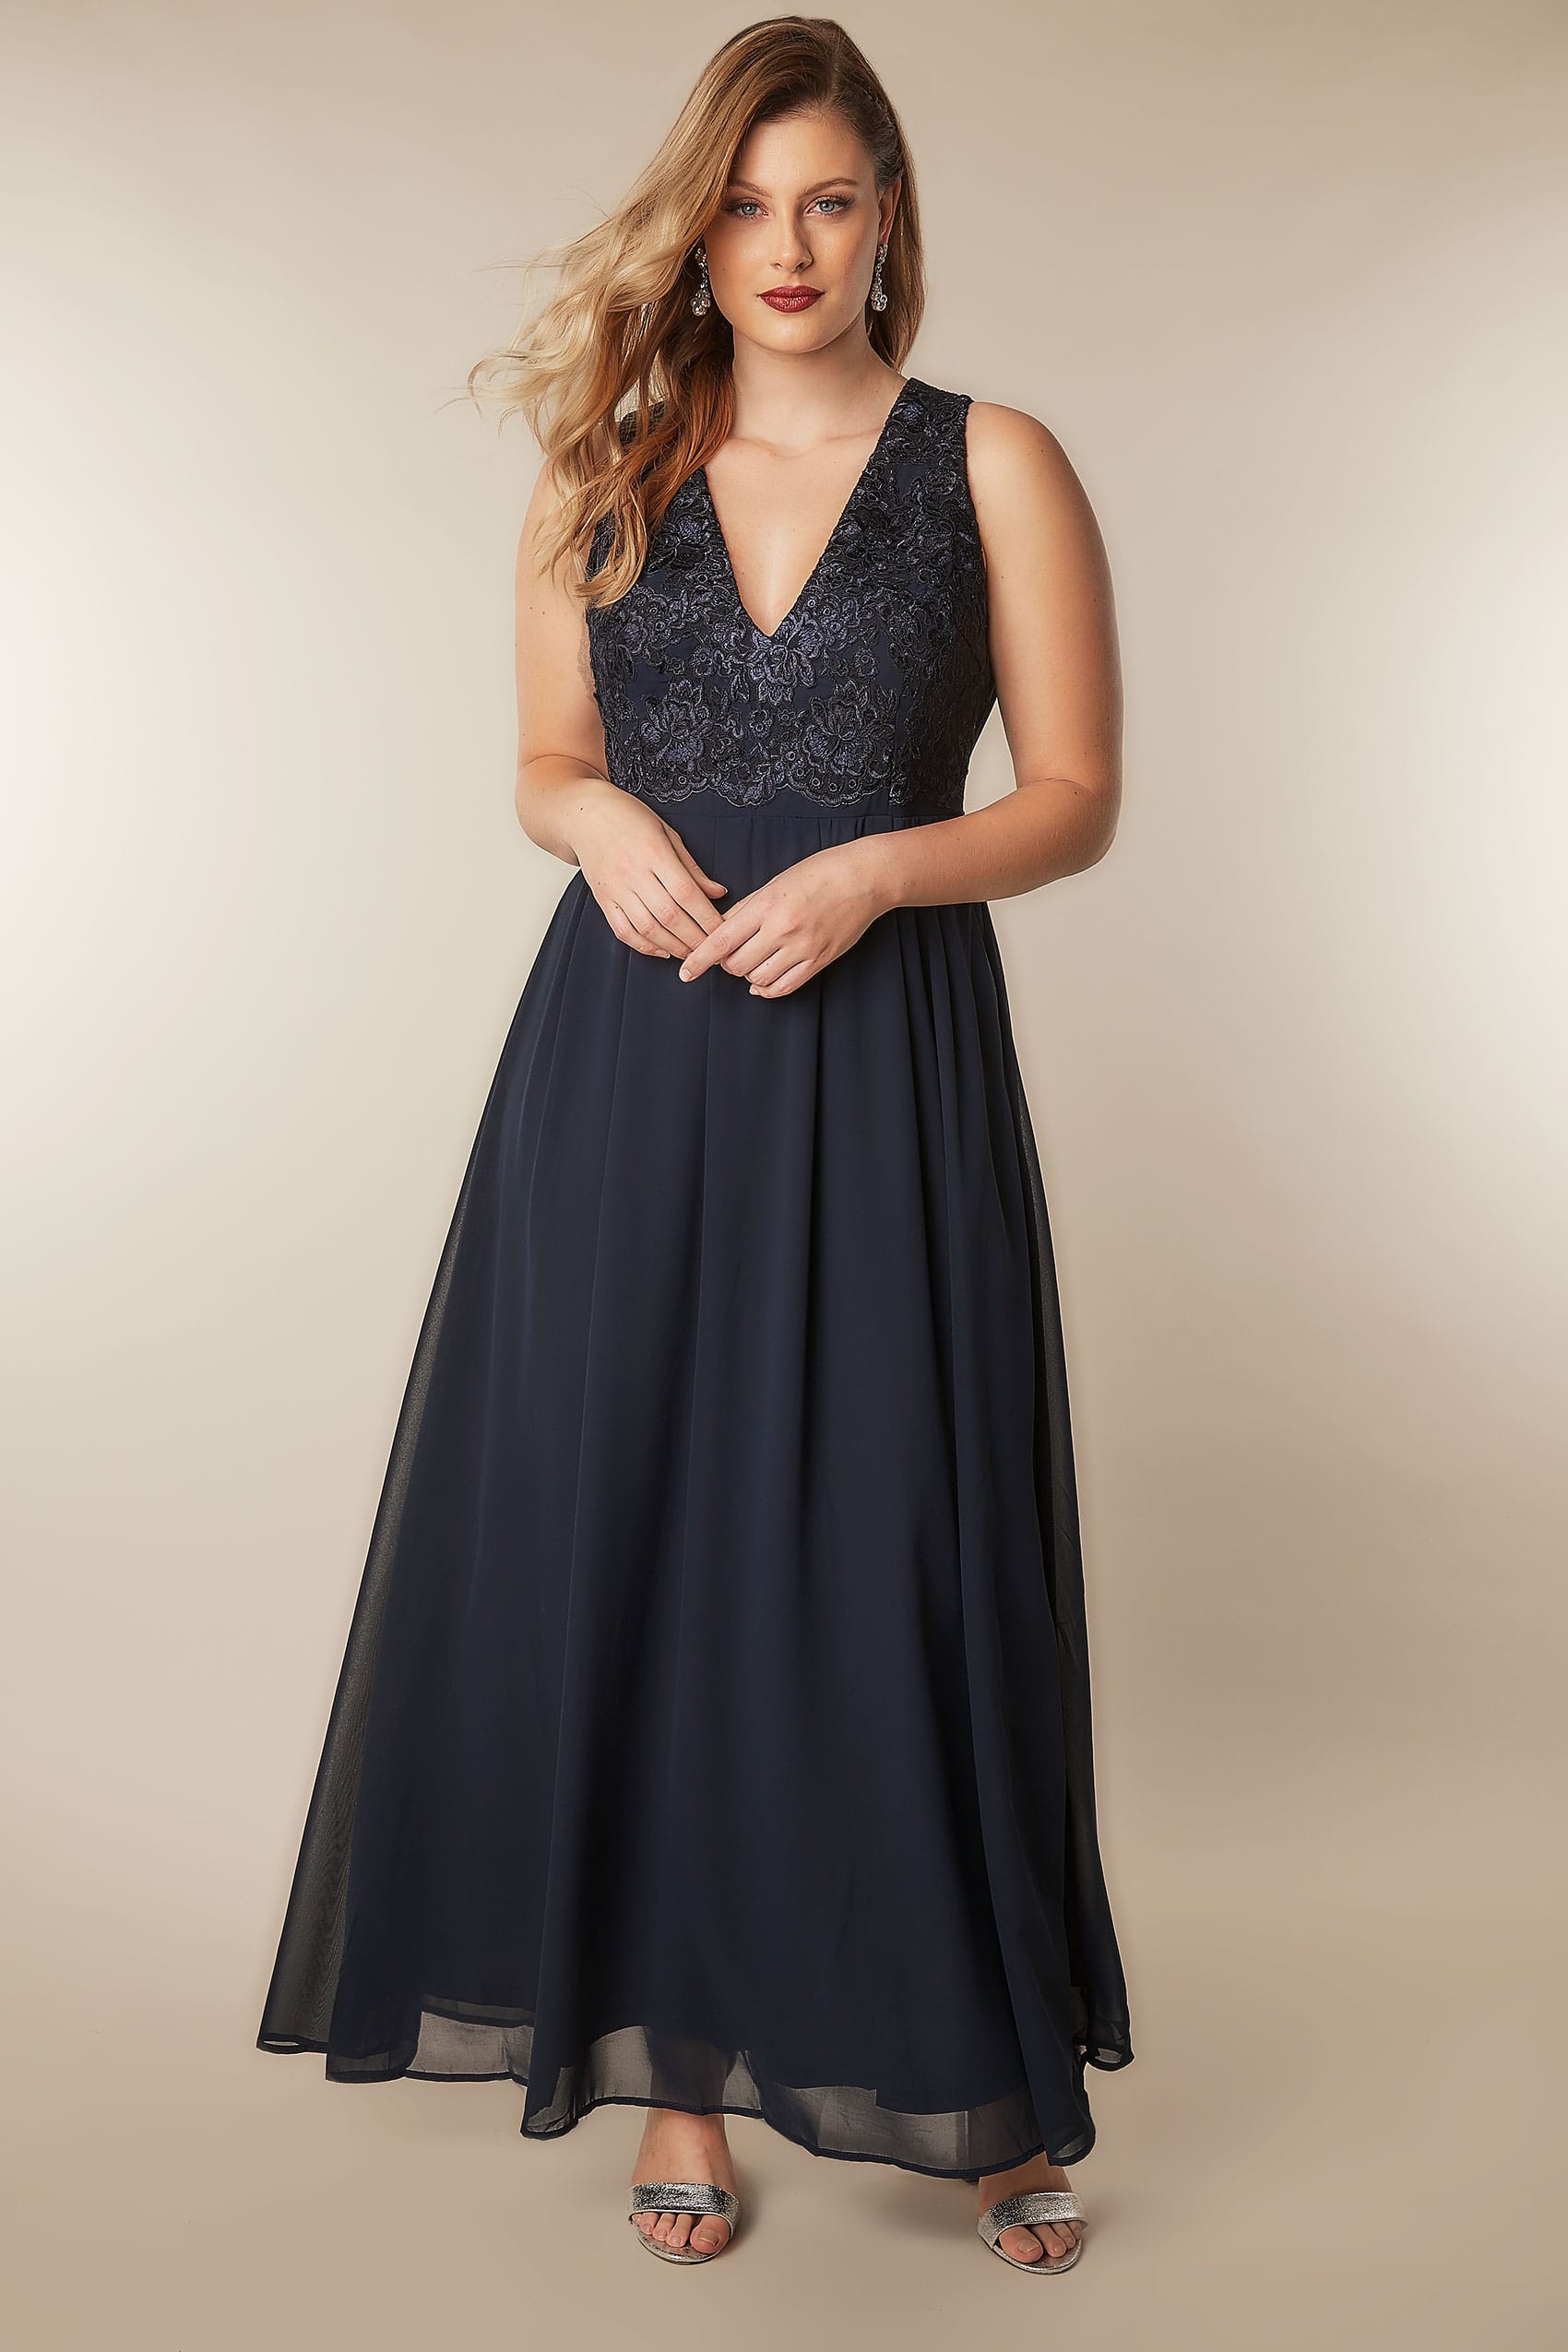 AX PARIS CURVE Navy Maxi Dress With Lace Overlay Bodice, Plus size 16 to 26